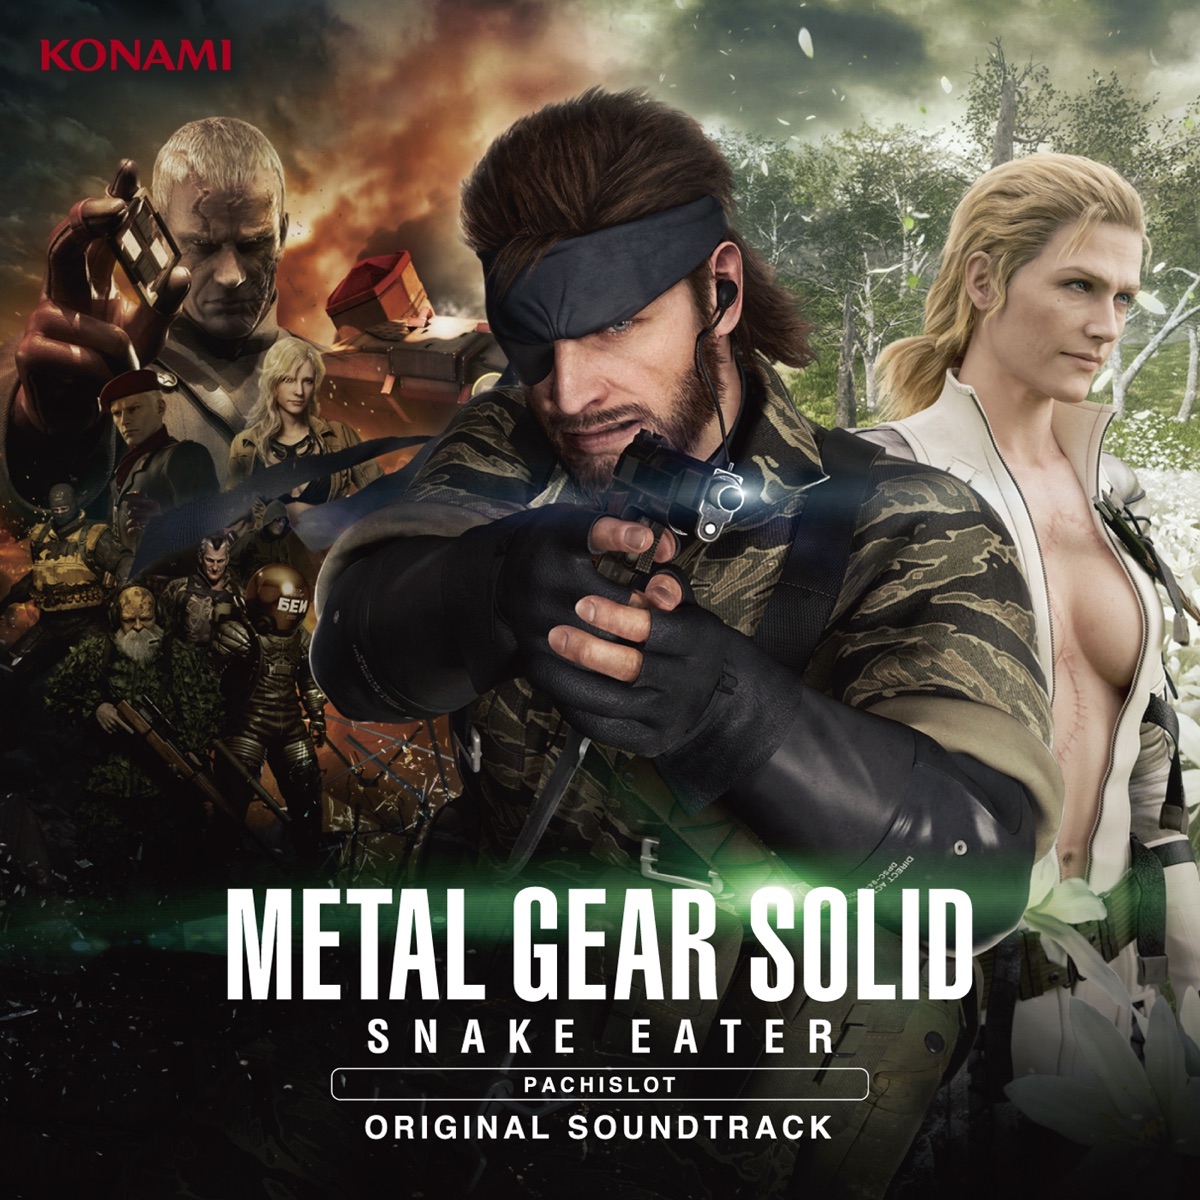 PACHISLOT METAL GEAR SOLID SNAKE EATER ORIGINAL SOUNDTRACK - Album by Various Artists